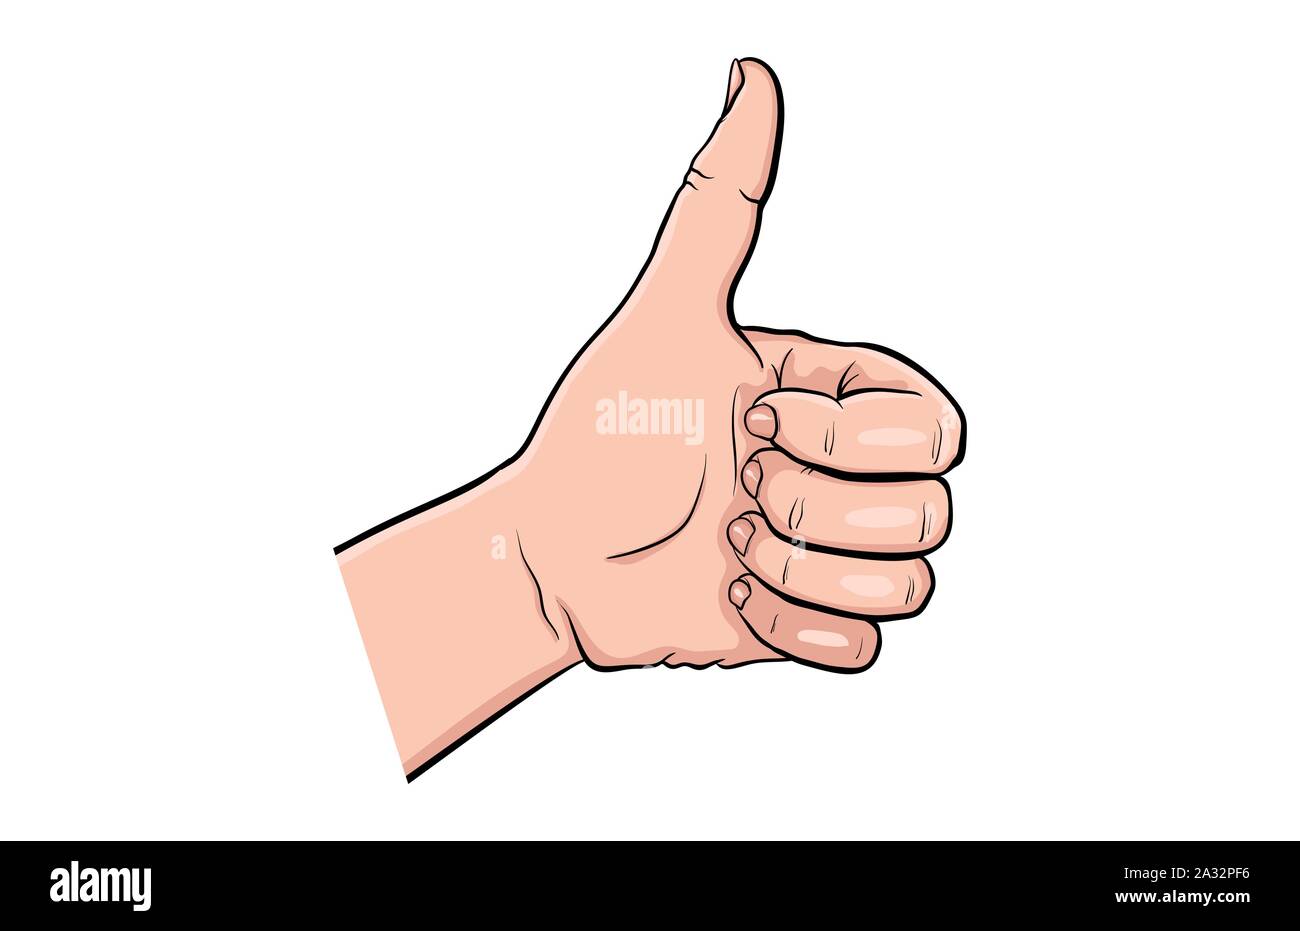 Hand gesture thumbs up Cut Out Stock Images & Pictures - Page 3 - Alamy